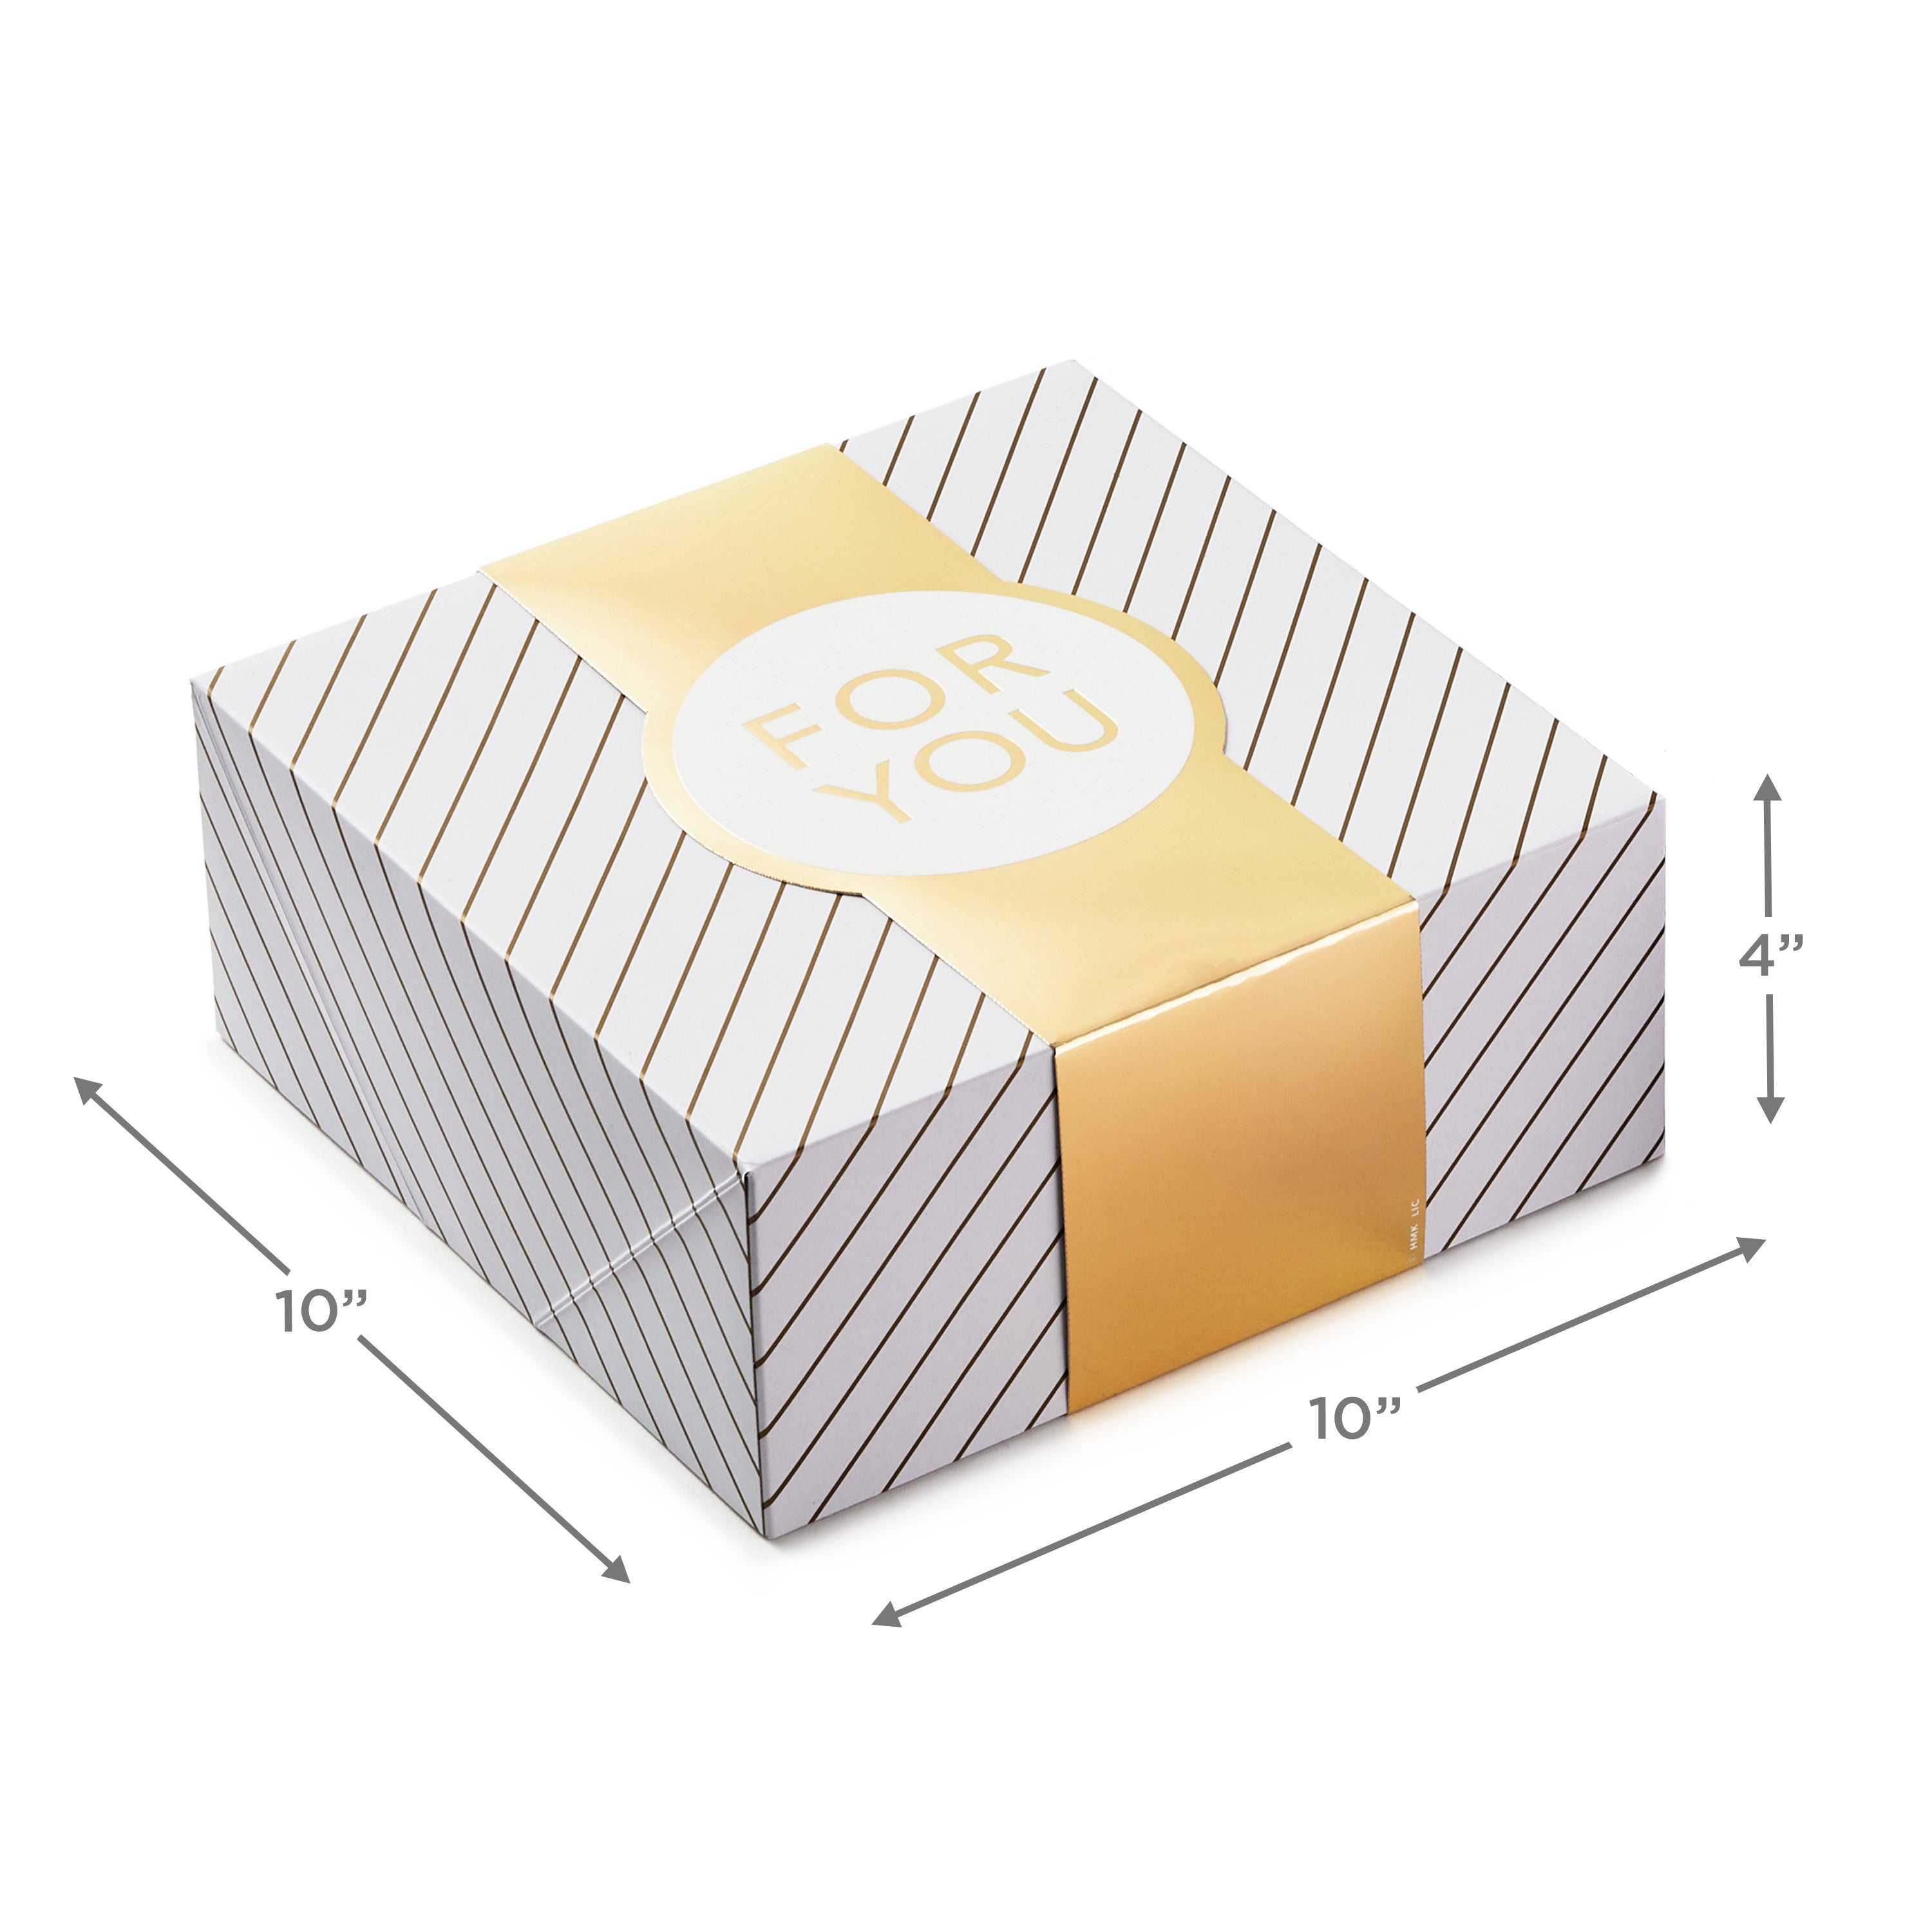 Hallmark 10" Large Gift Boxes with Wrap Bands (2-Pack: White and Gold, "For You") for Weddings, Graduations, Valentine's Day, Christmas, Hanukkah, Birthdays